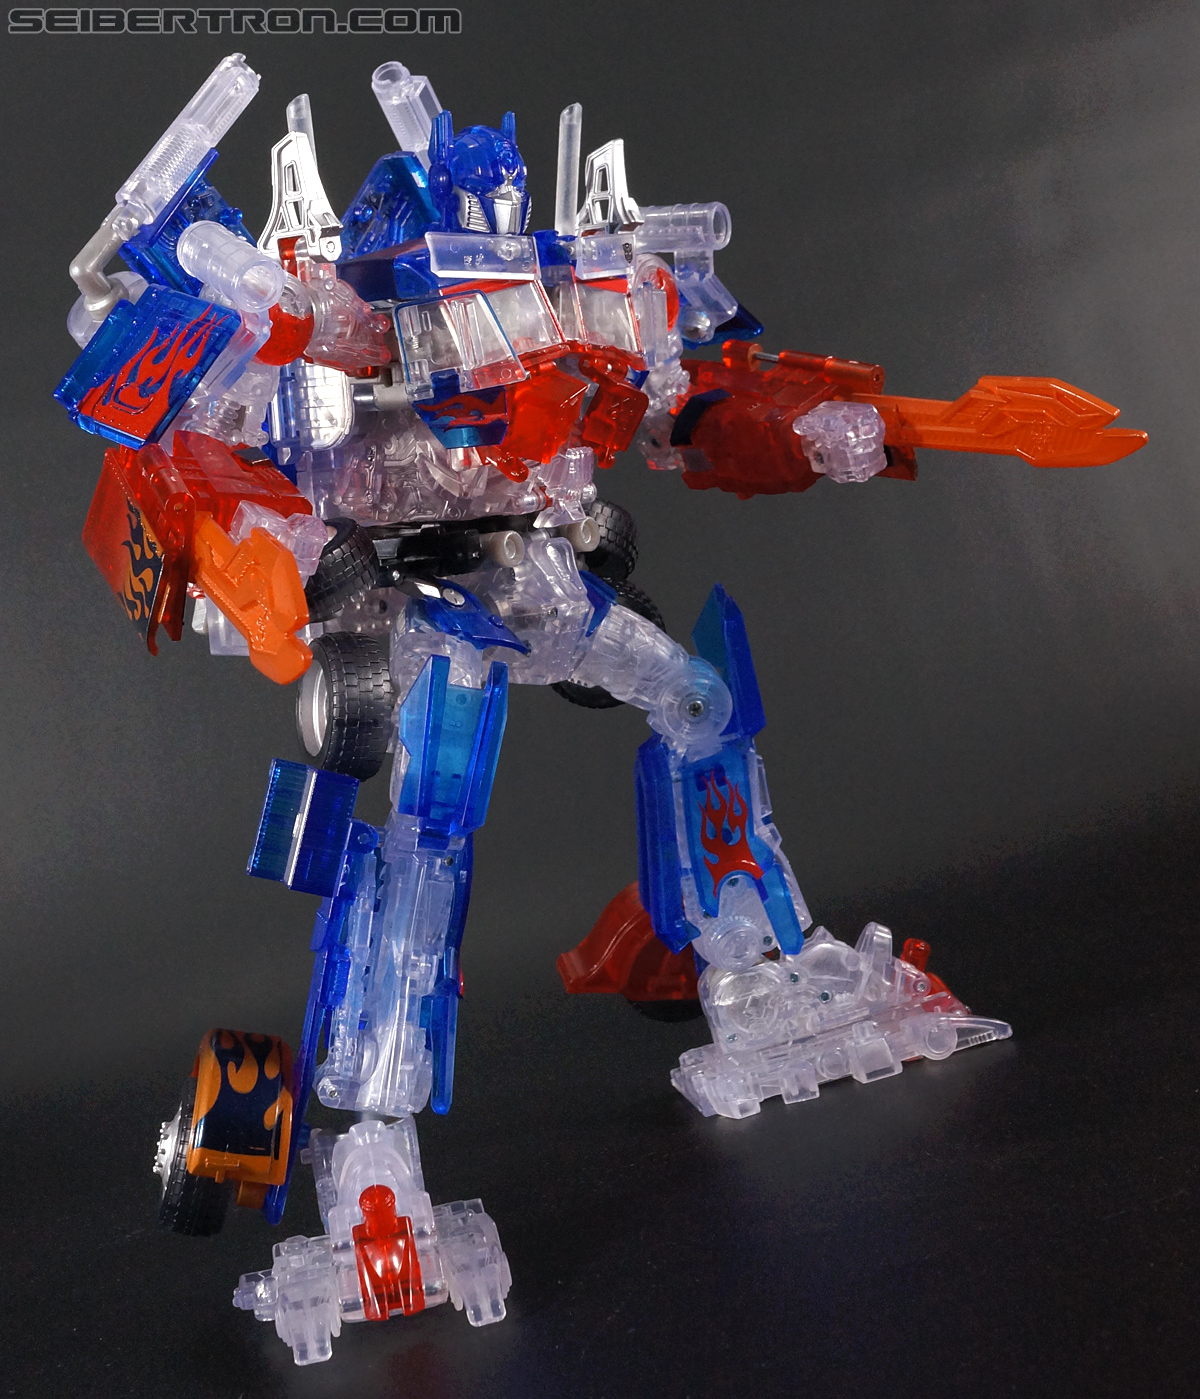 Transformers Revenge of the Fallen Optimus Prime Limited Clear Color Edition (Image #101 of 125)